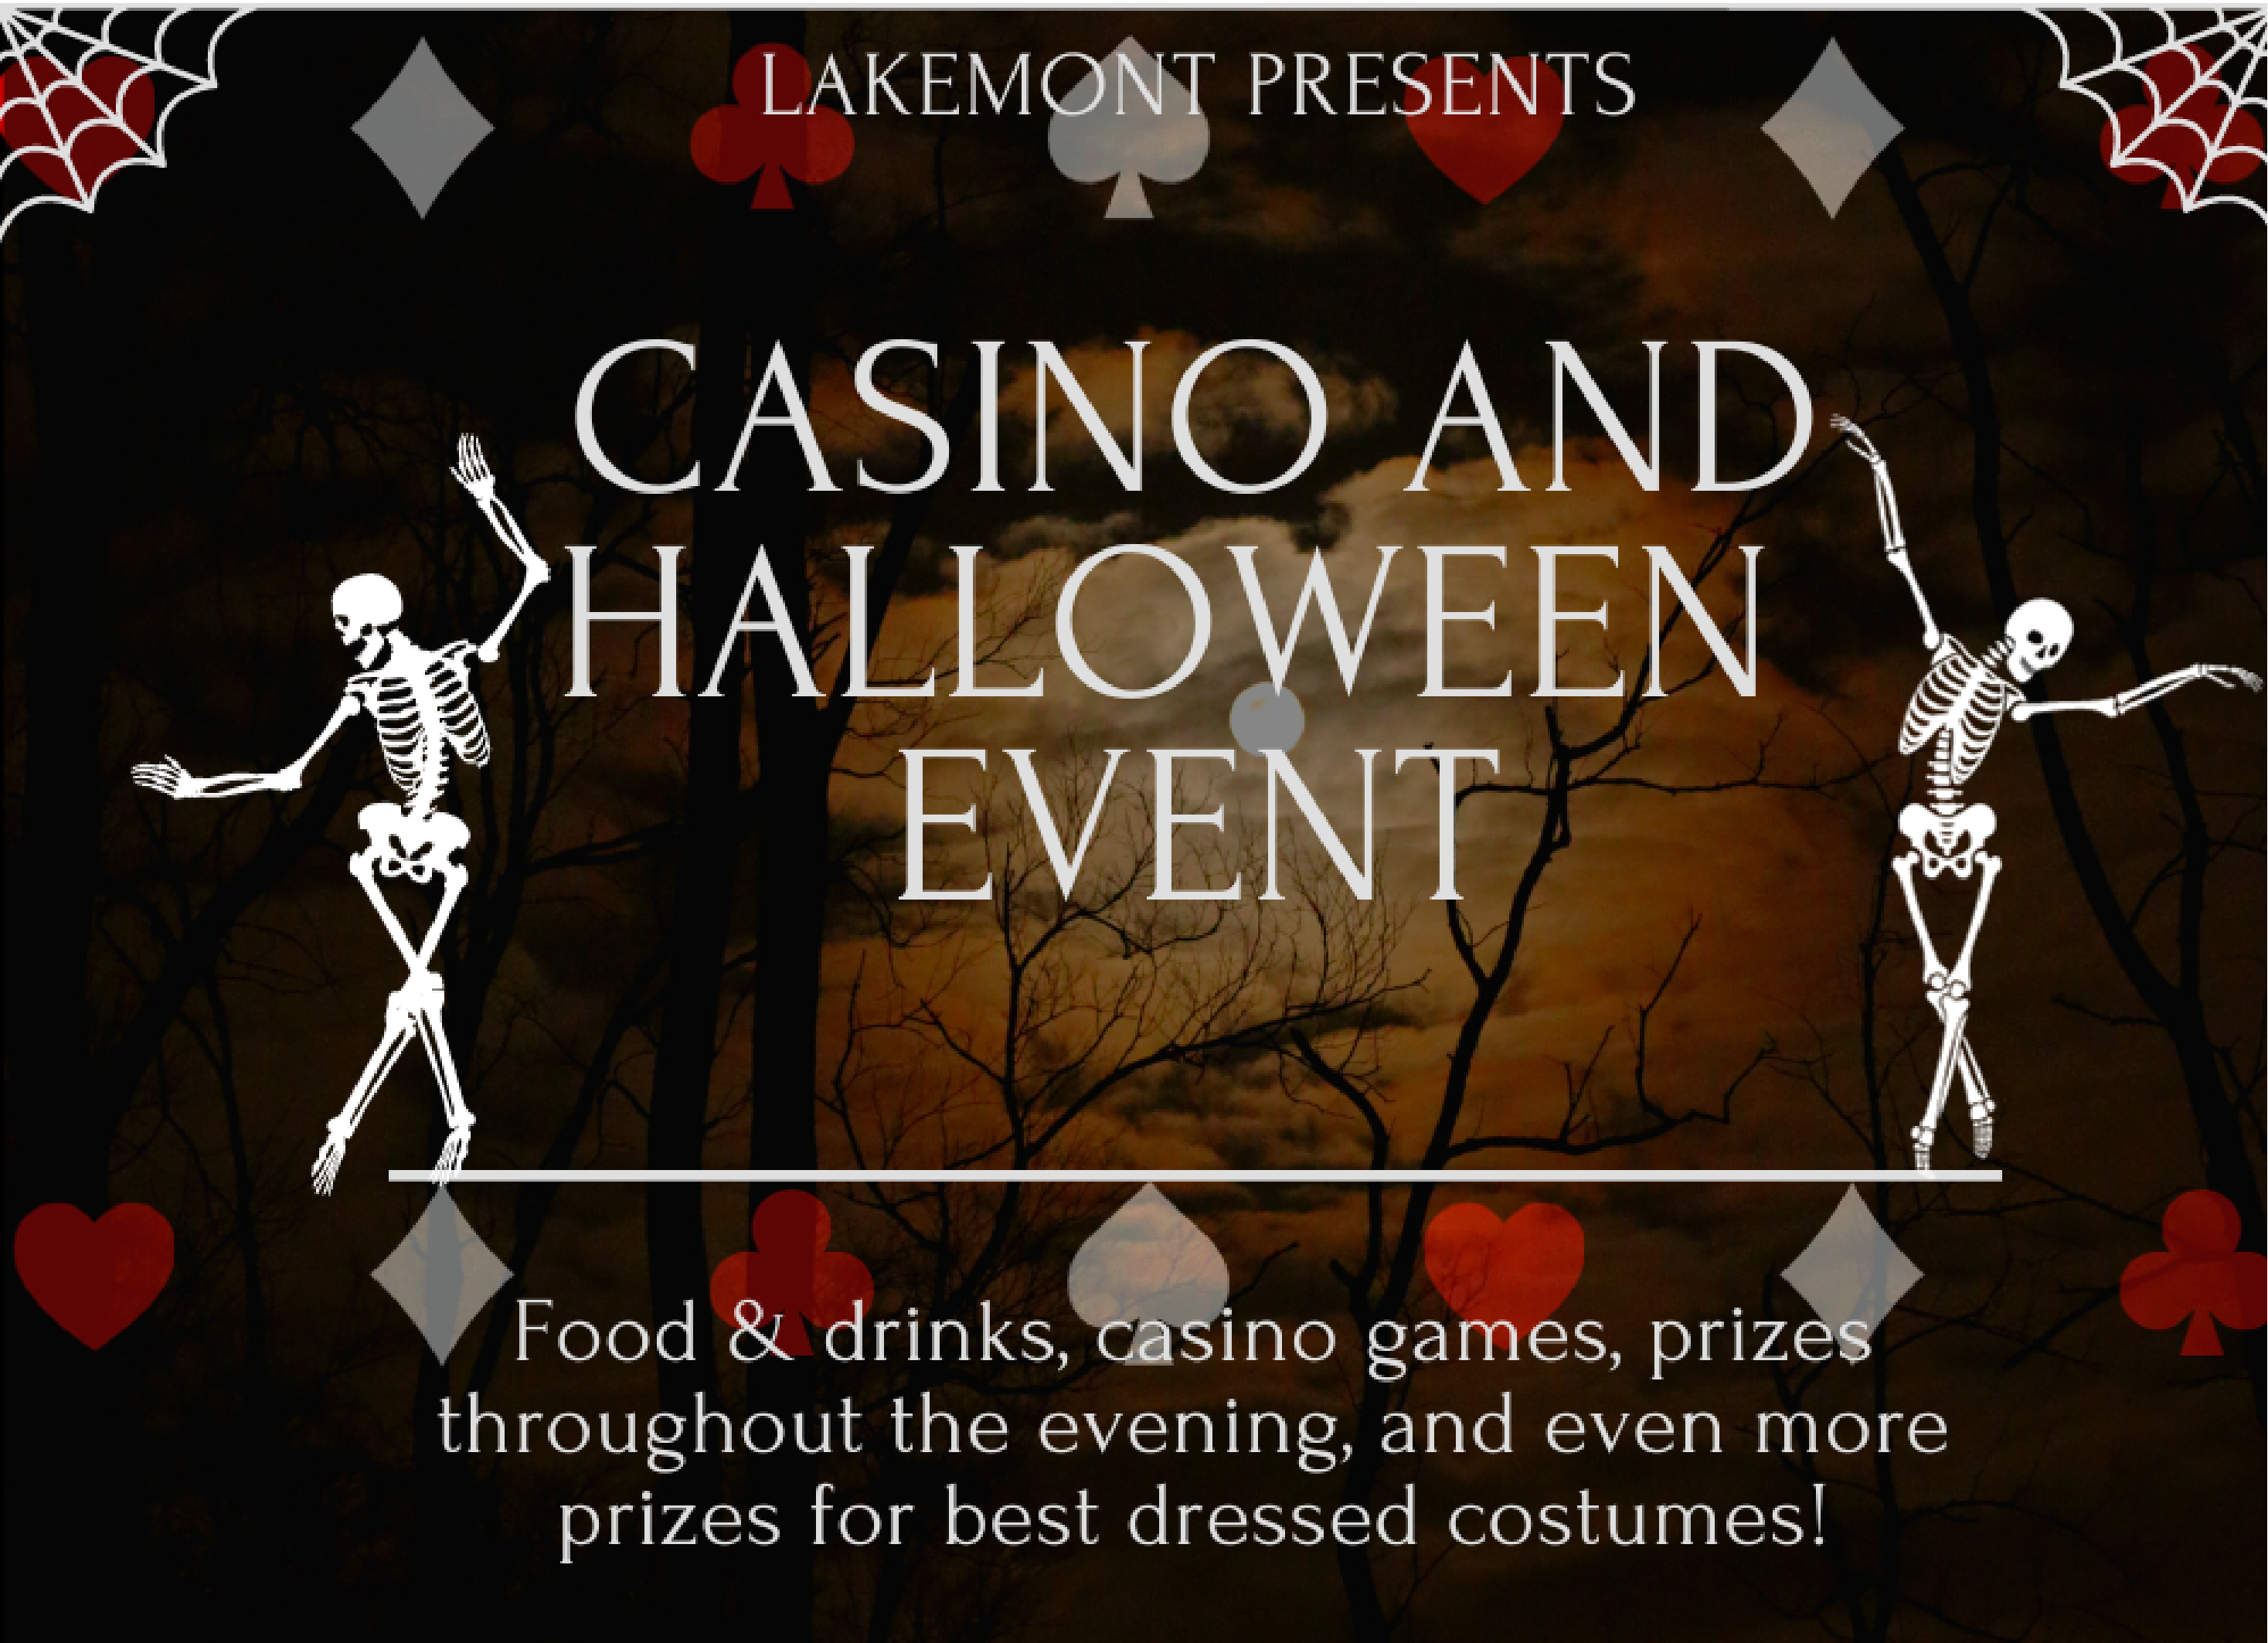 REMINDER: Lakemont to Host Casino & Halloween Event on October 28